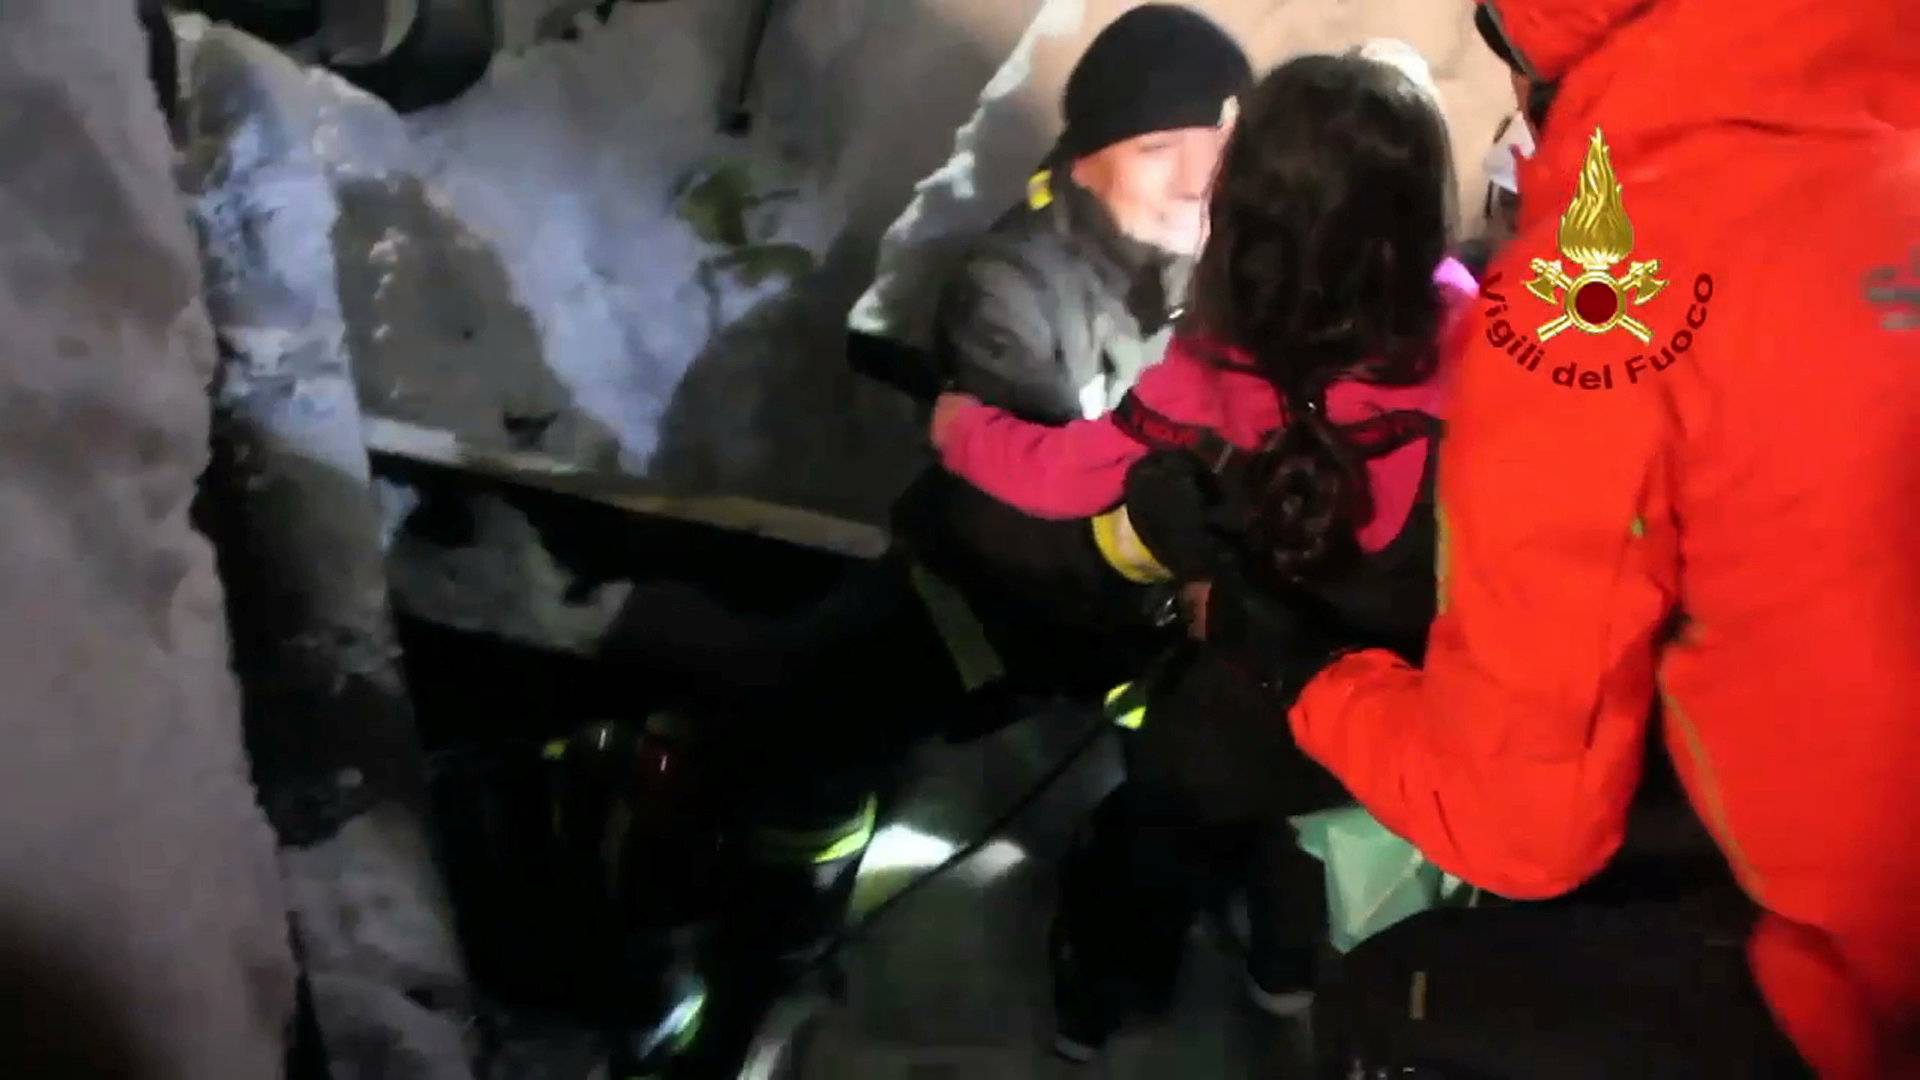 A still image taken from a video shows a survivor, rescued by Italian firefighters, at the Hotel Rigopiano in Farindola, central Italy, which was hit by an avalanche